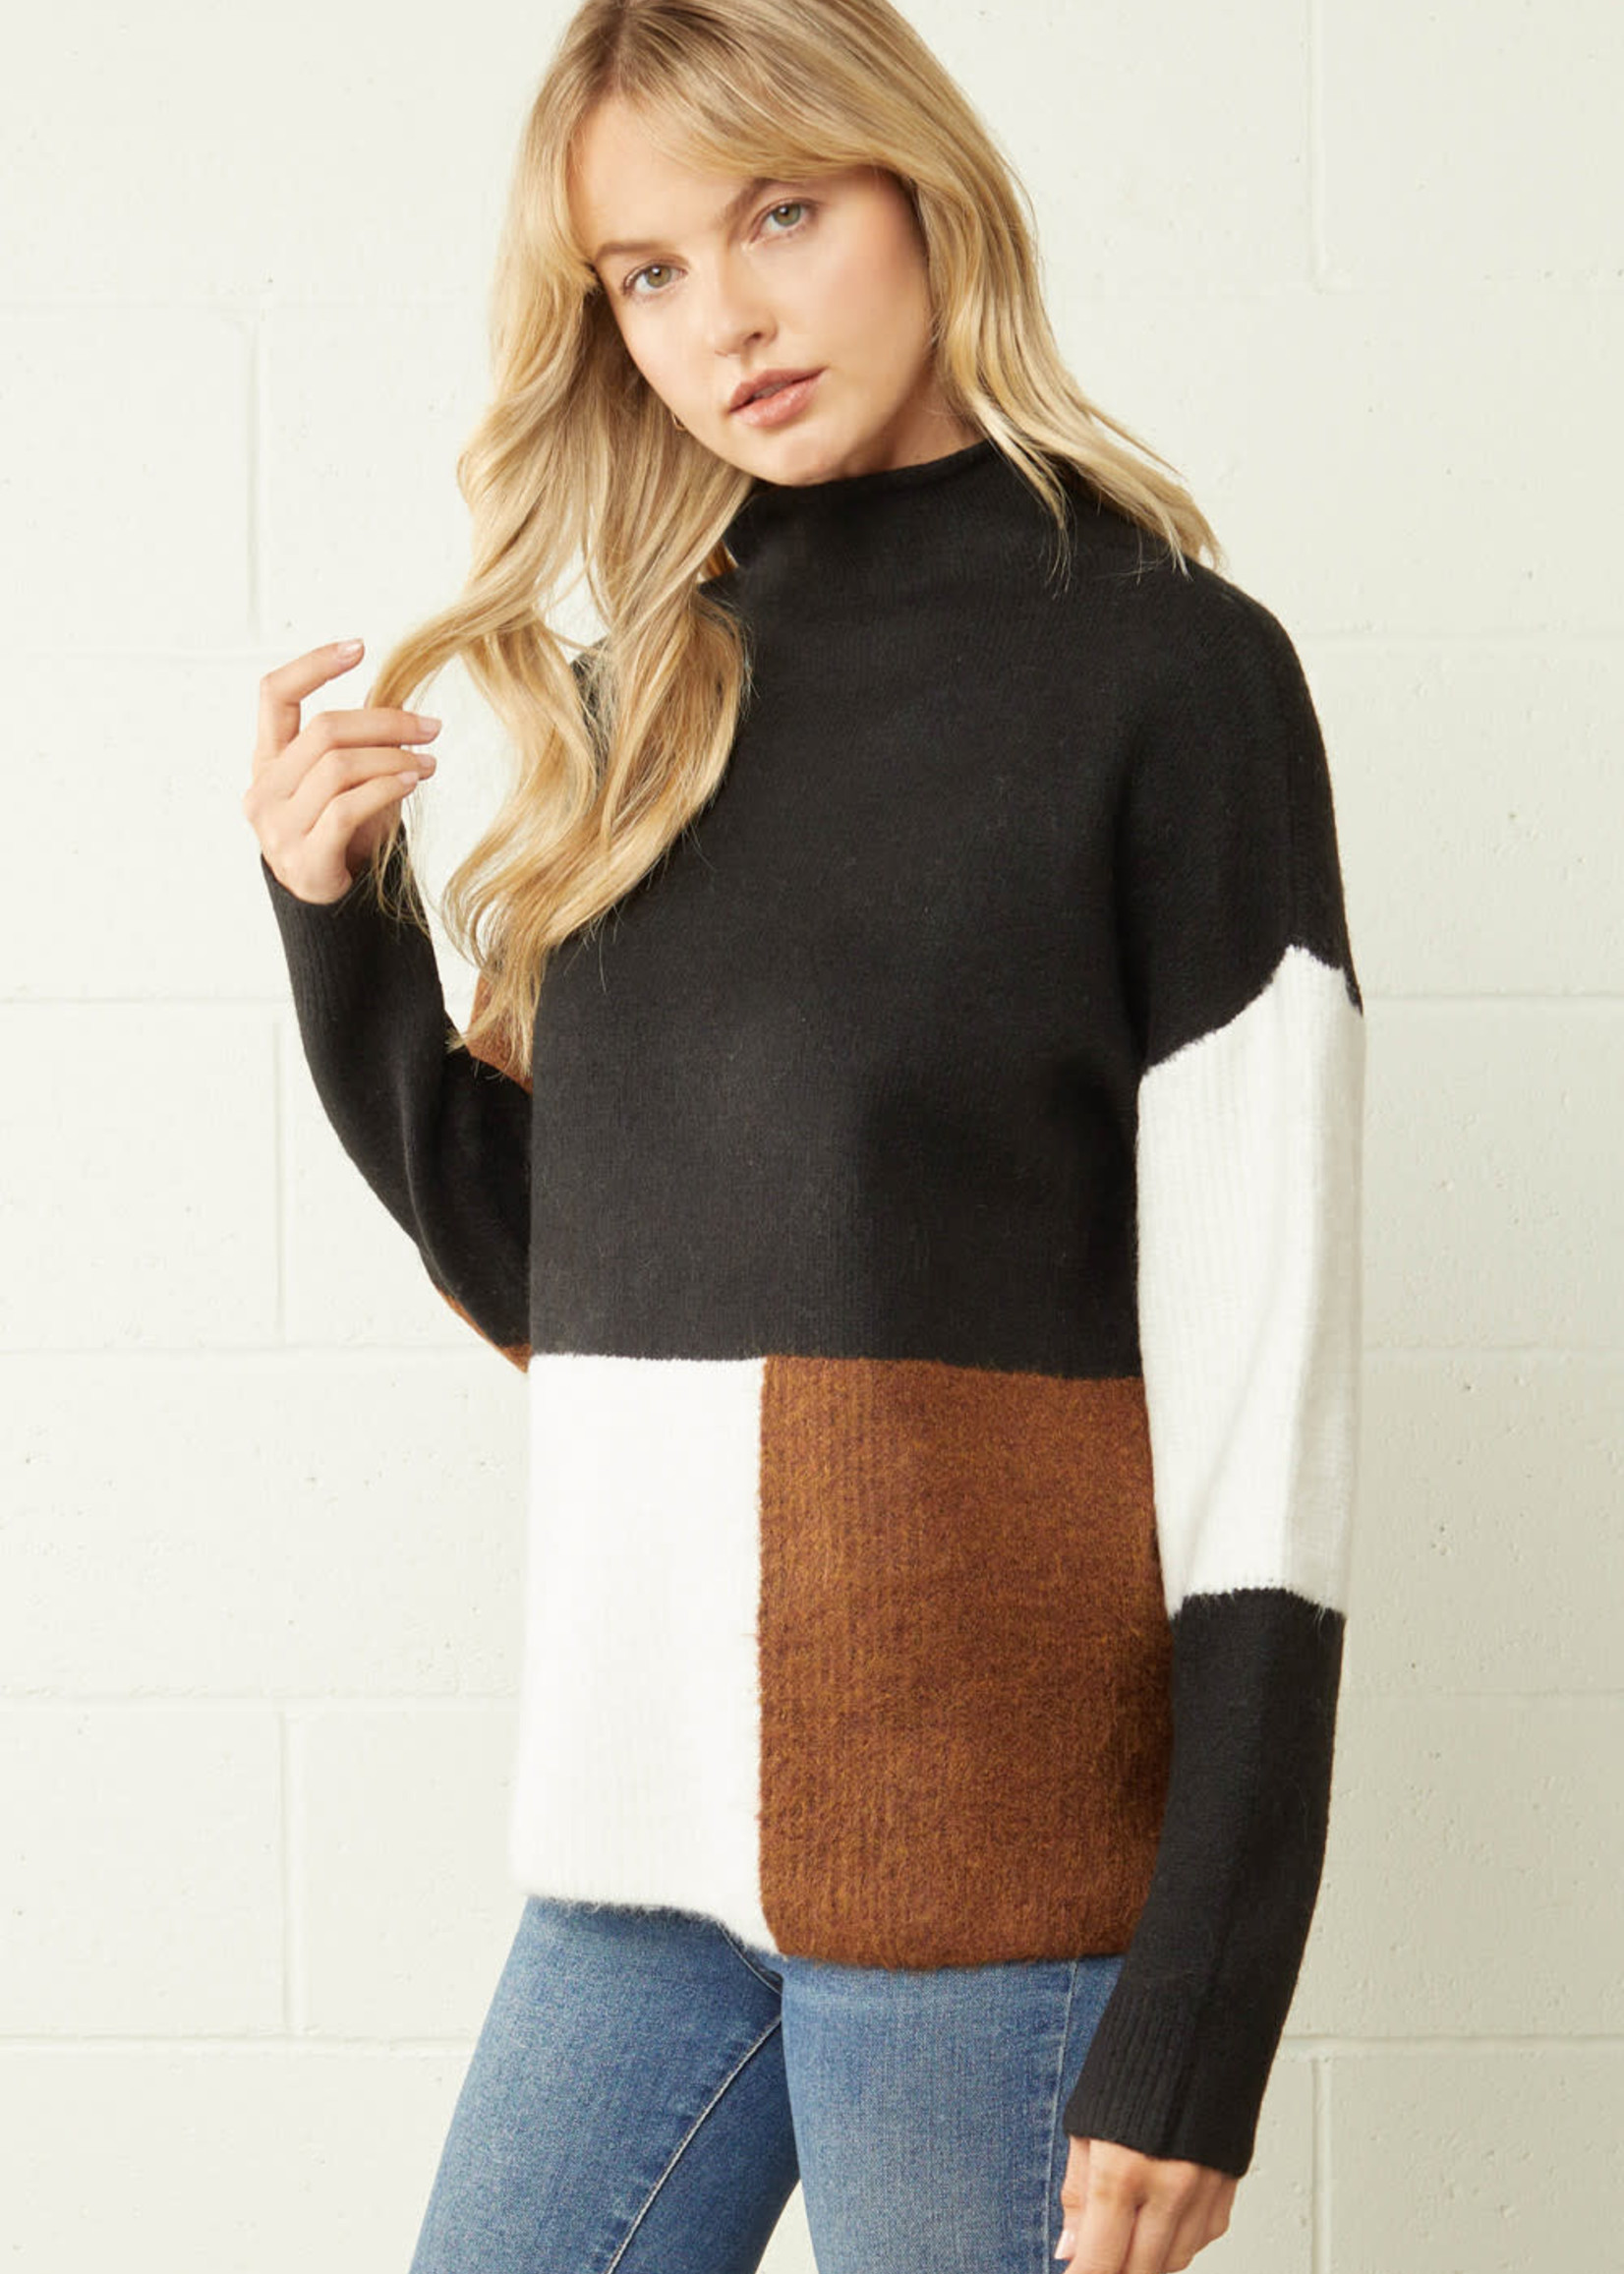 Cause We Can Colorblock Sweater (2 Colors)